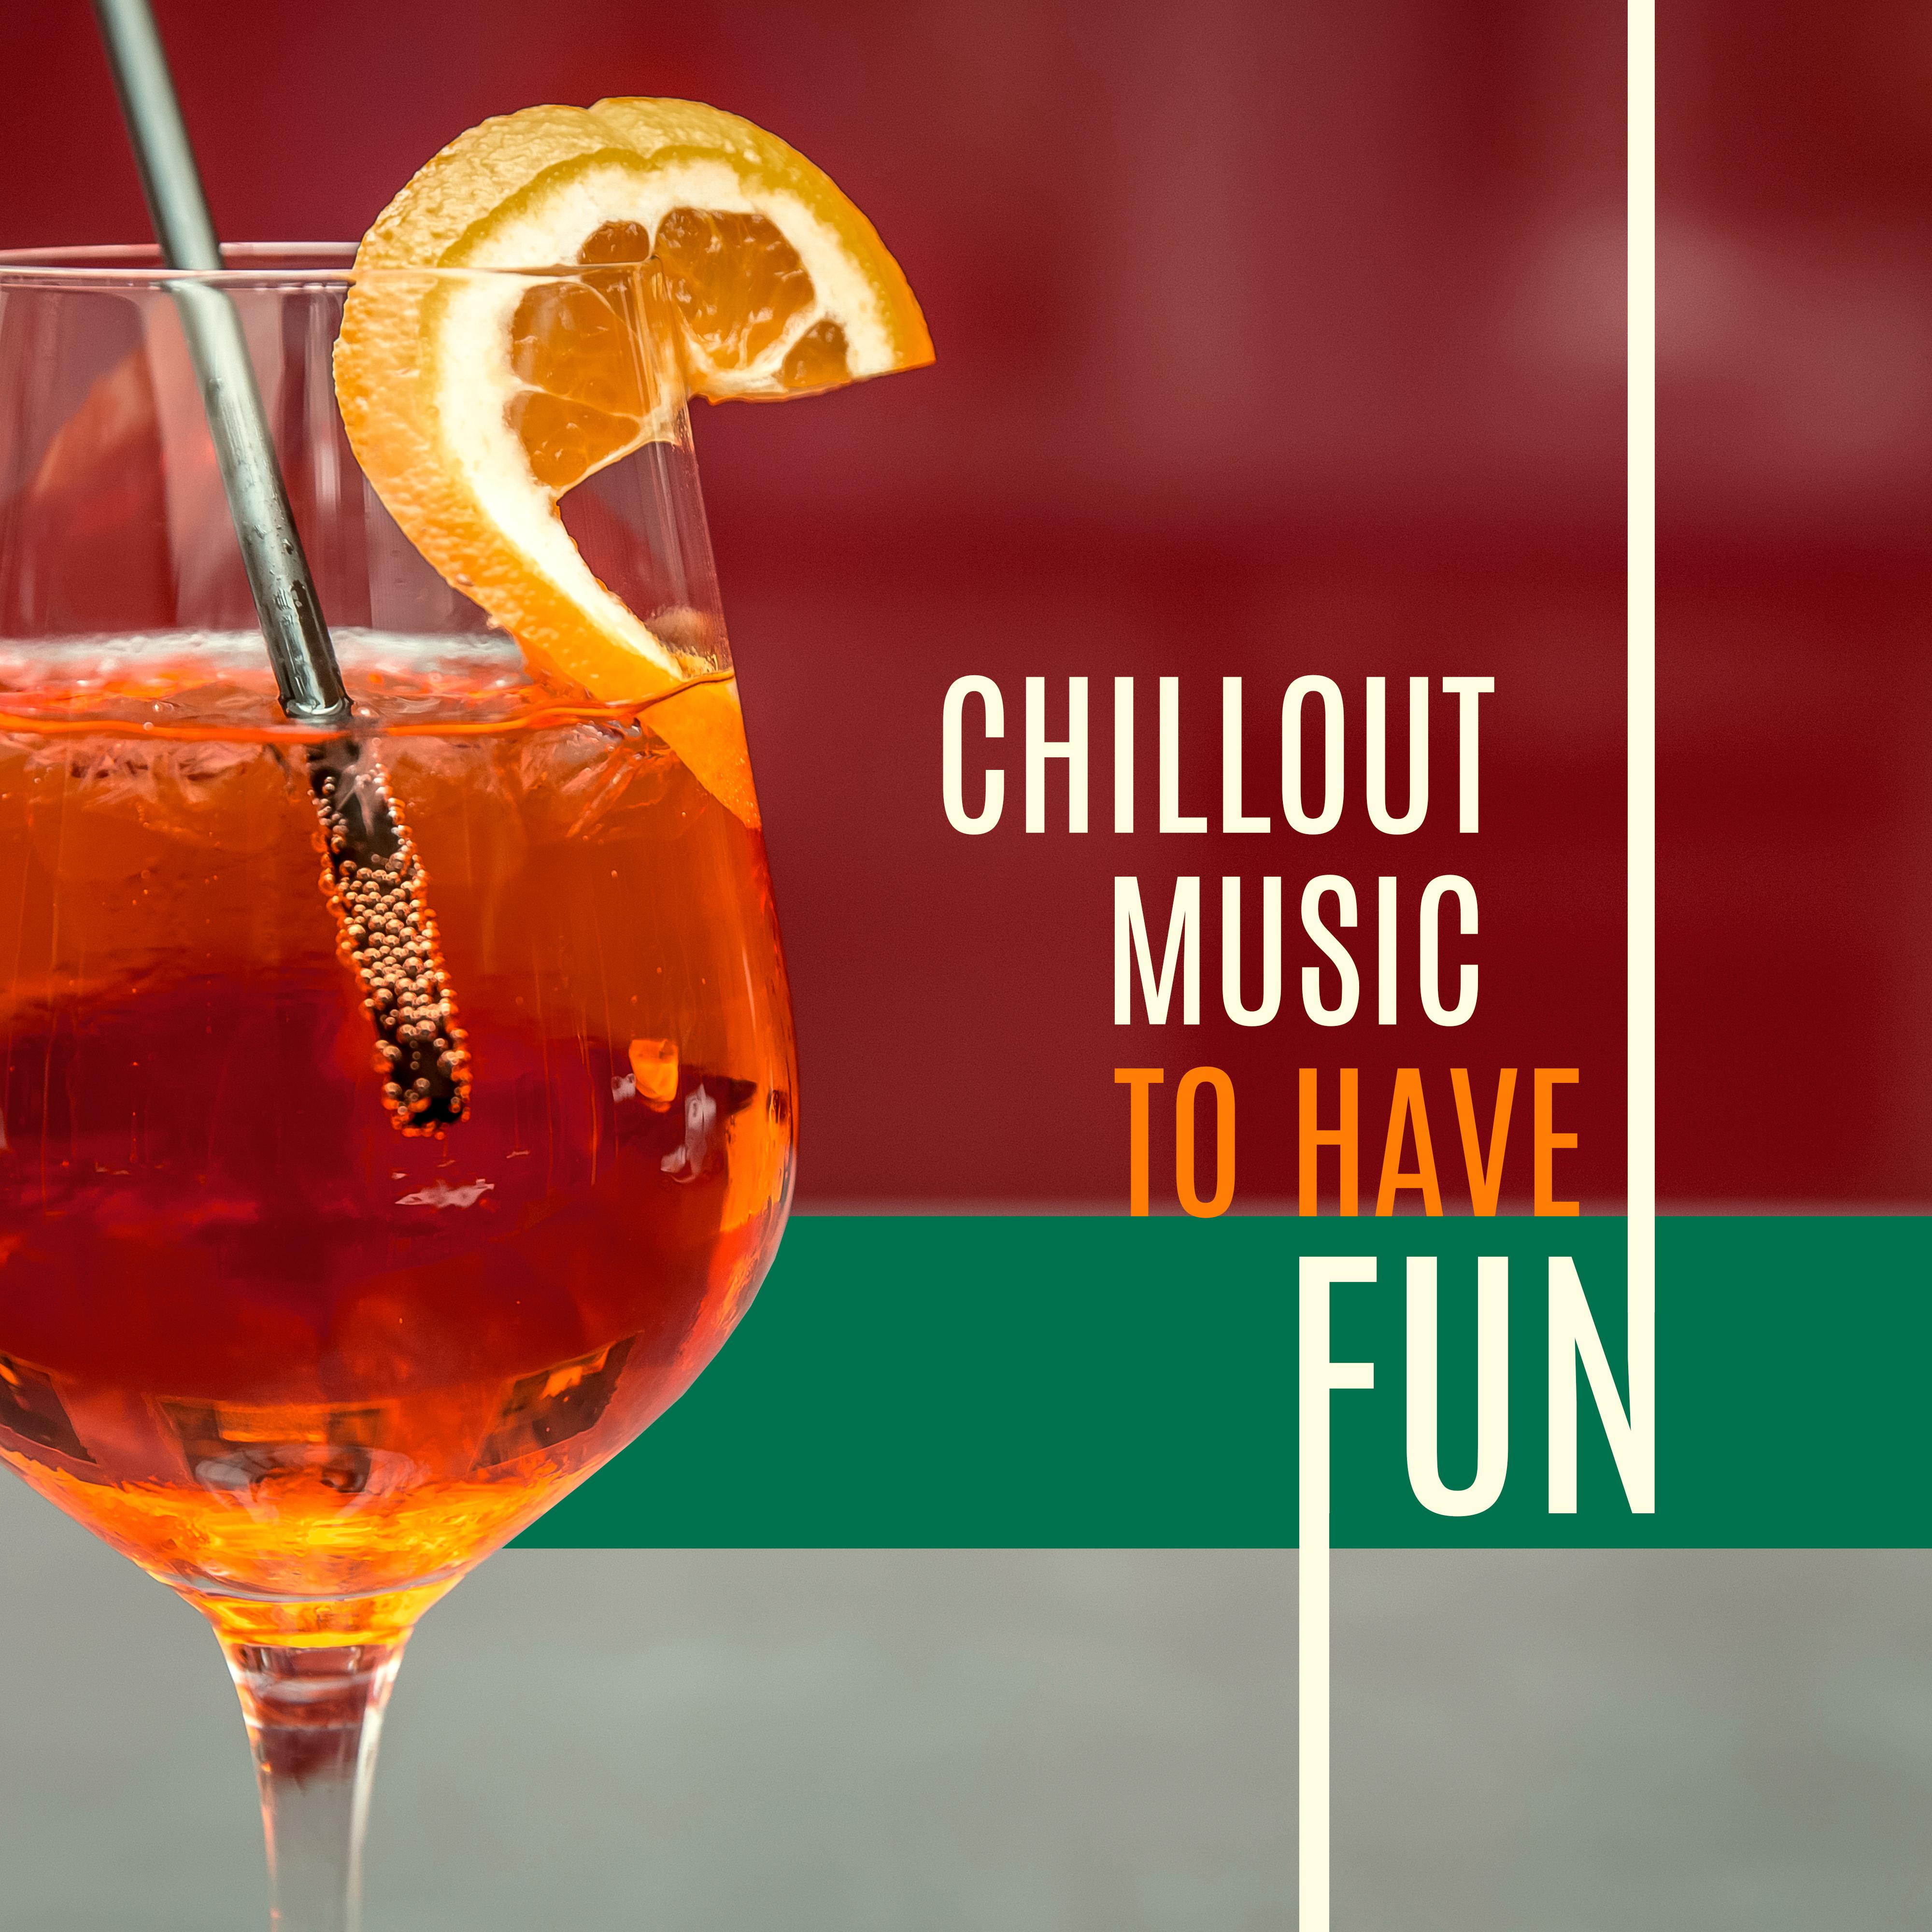 Chill Out Music to Have Fun  Party Time, Drinks  Cocktails, Hot Dance, Chill Out Vibes